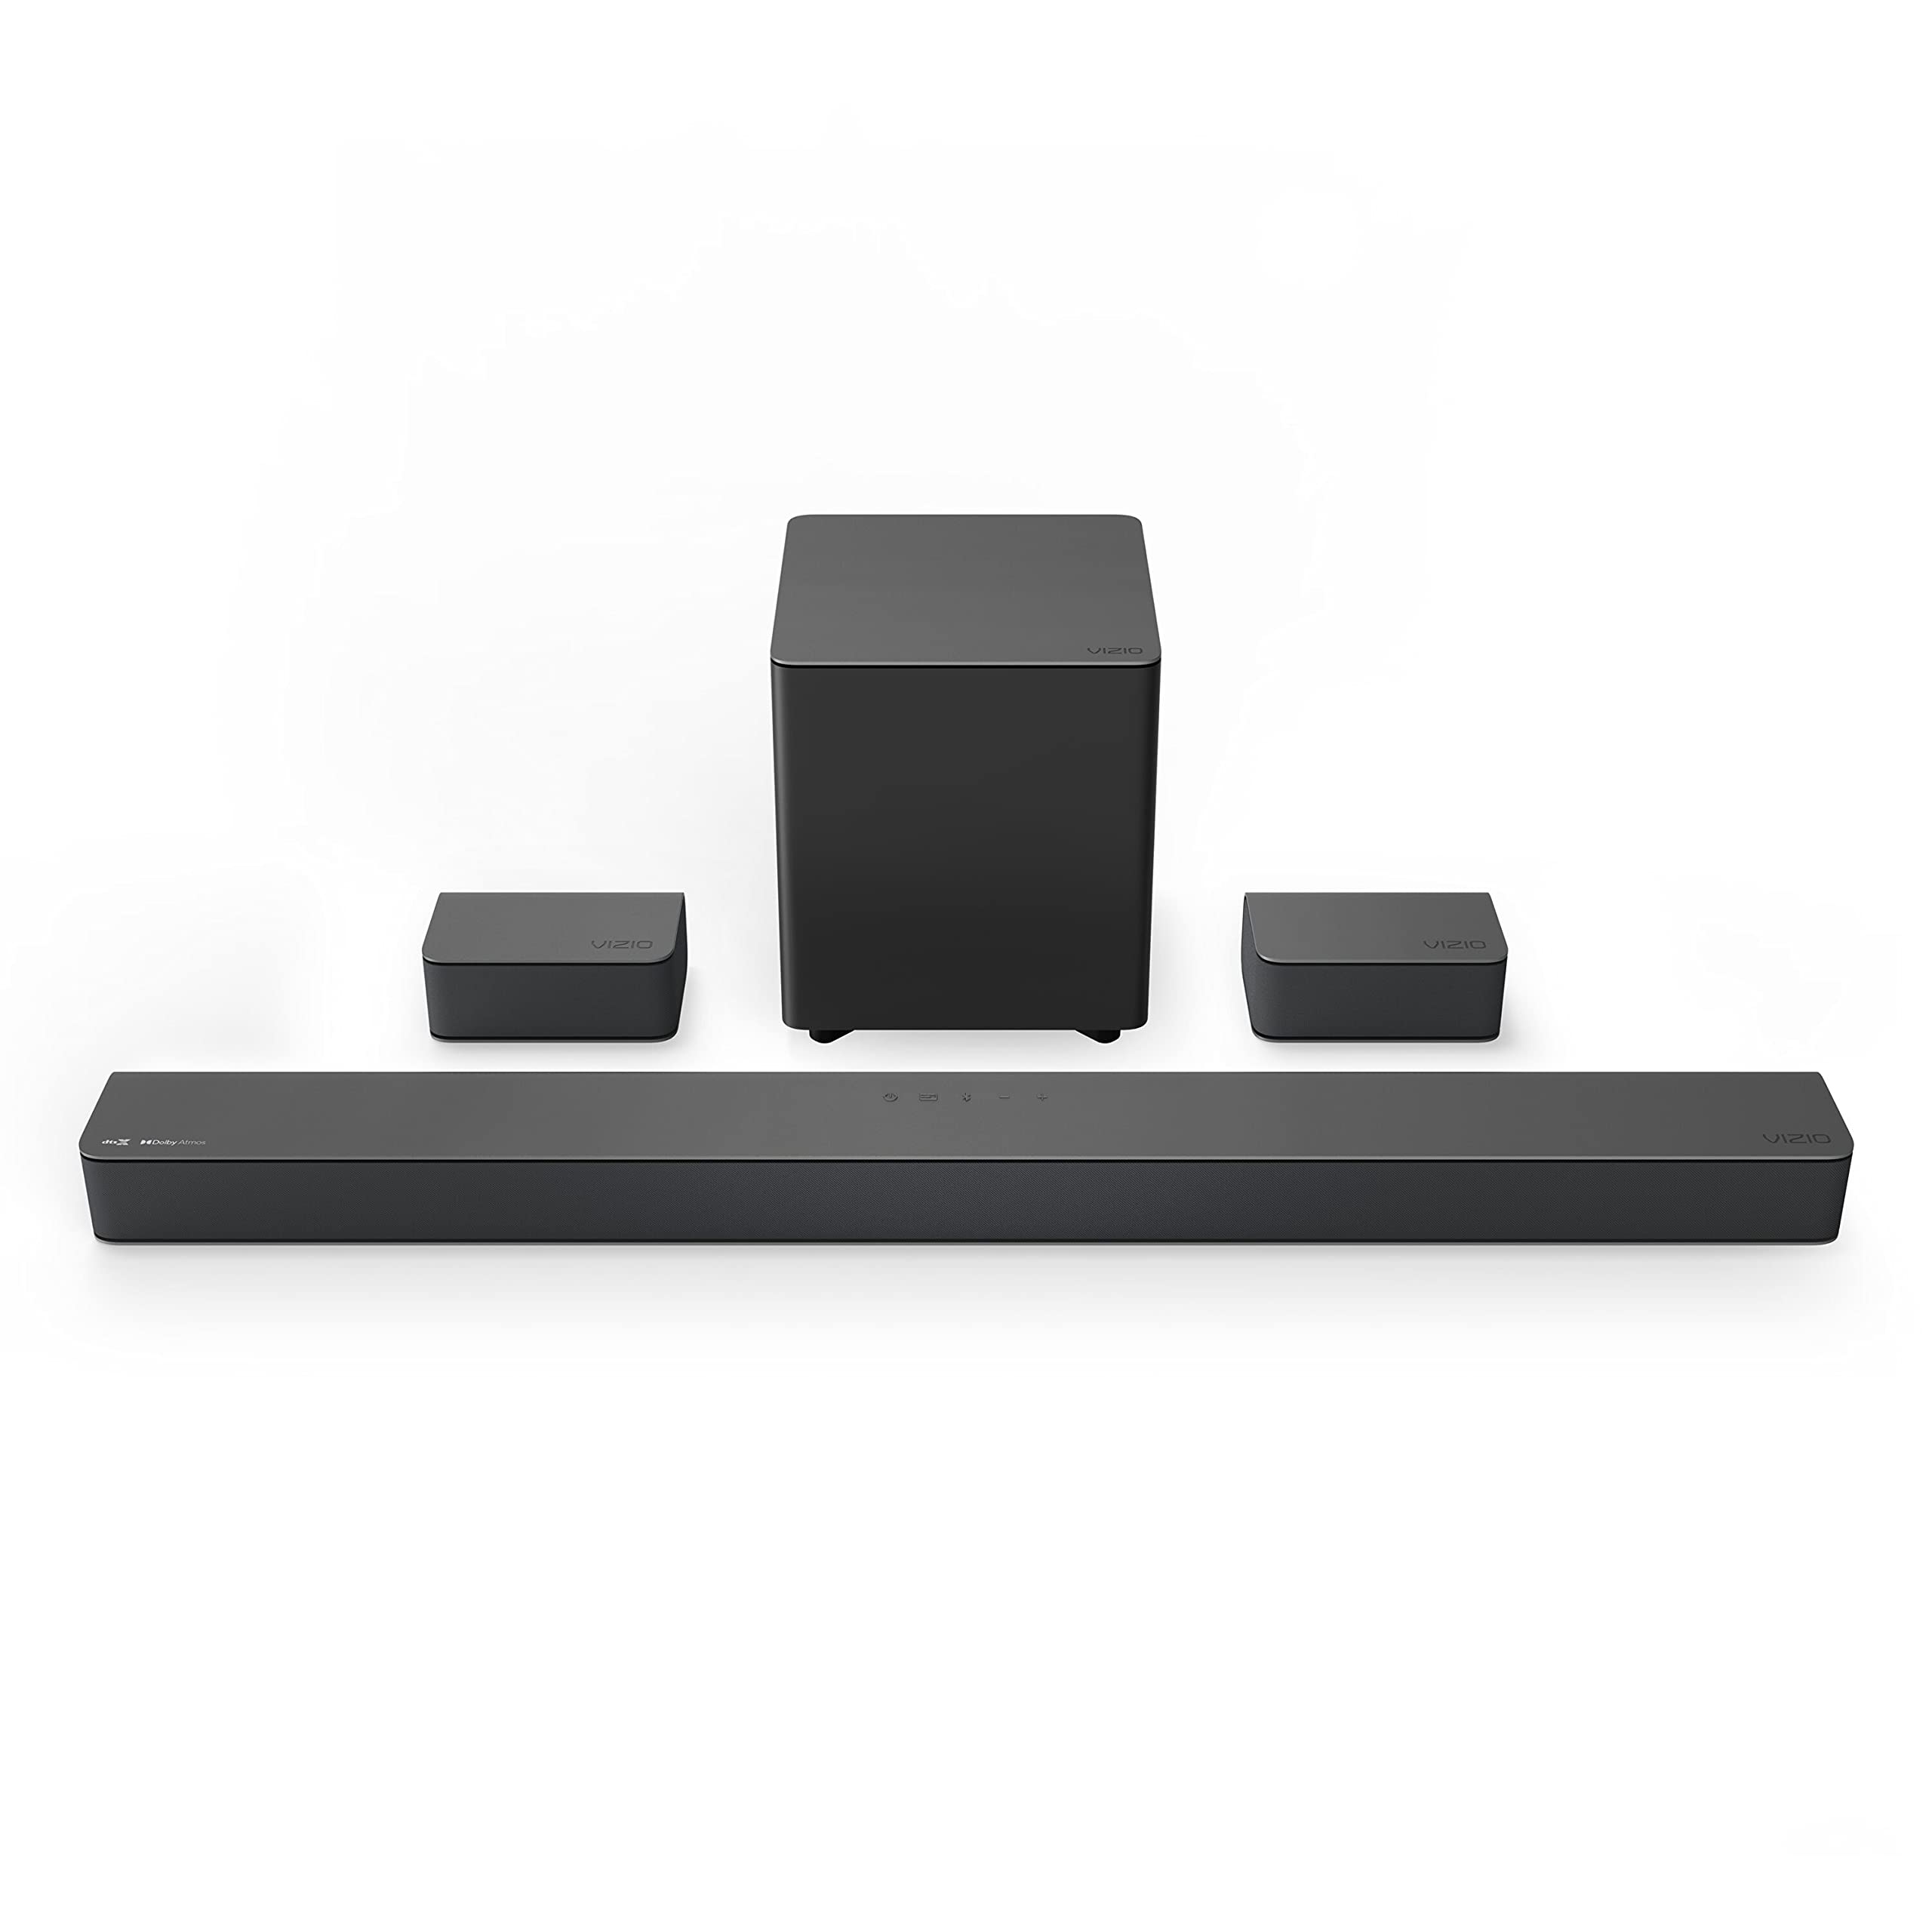 VIZIO M-Series 5.1 Premium Sound Bar with Dolby Atmos, DTS:X, Bluetooth, Wireless Subwoofer and Alexa Compatibility, M51ax-J6, 2022 Model